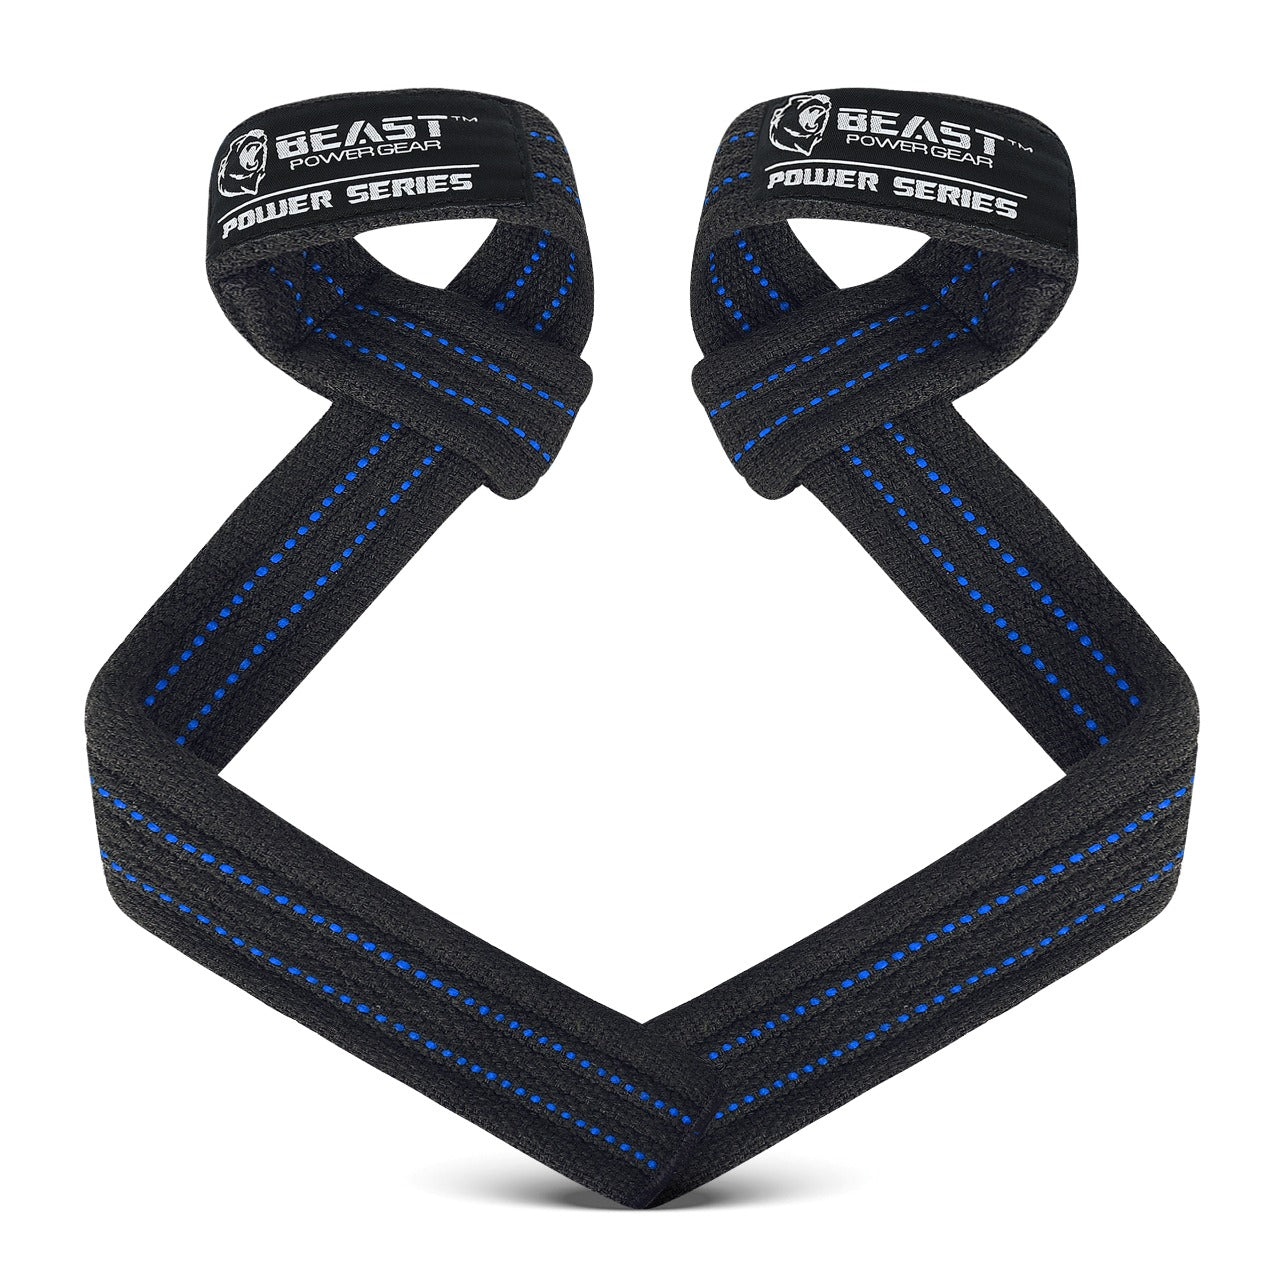  BEAST RAGE Lifting Straps for Weightlifting, Weight Lifting Straps  Gym Power Workouts Lifting Wrist Straps Padded Cotton Men Women Support  Lifters Deadlift Straps Hard Pull Exercise Straps (Black) : Sports